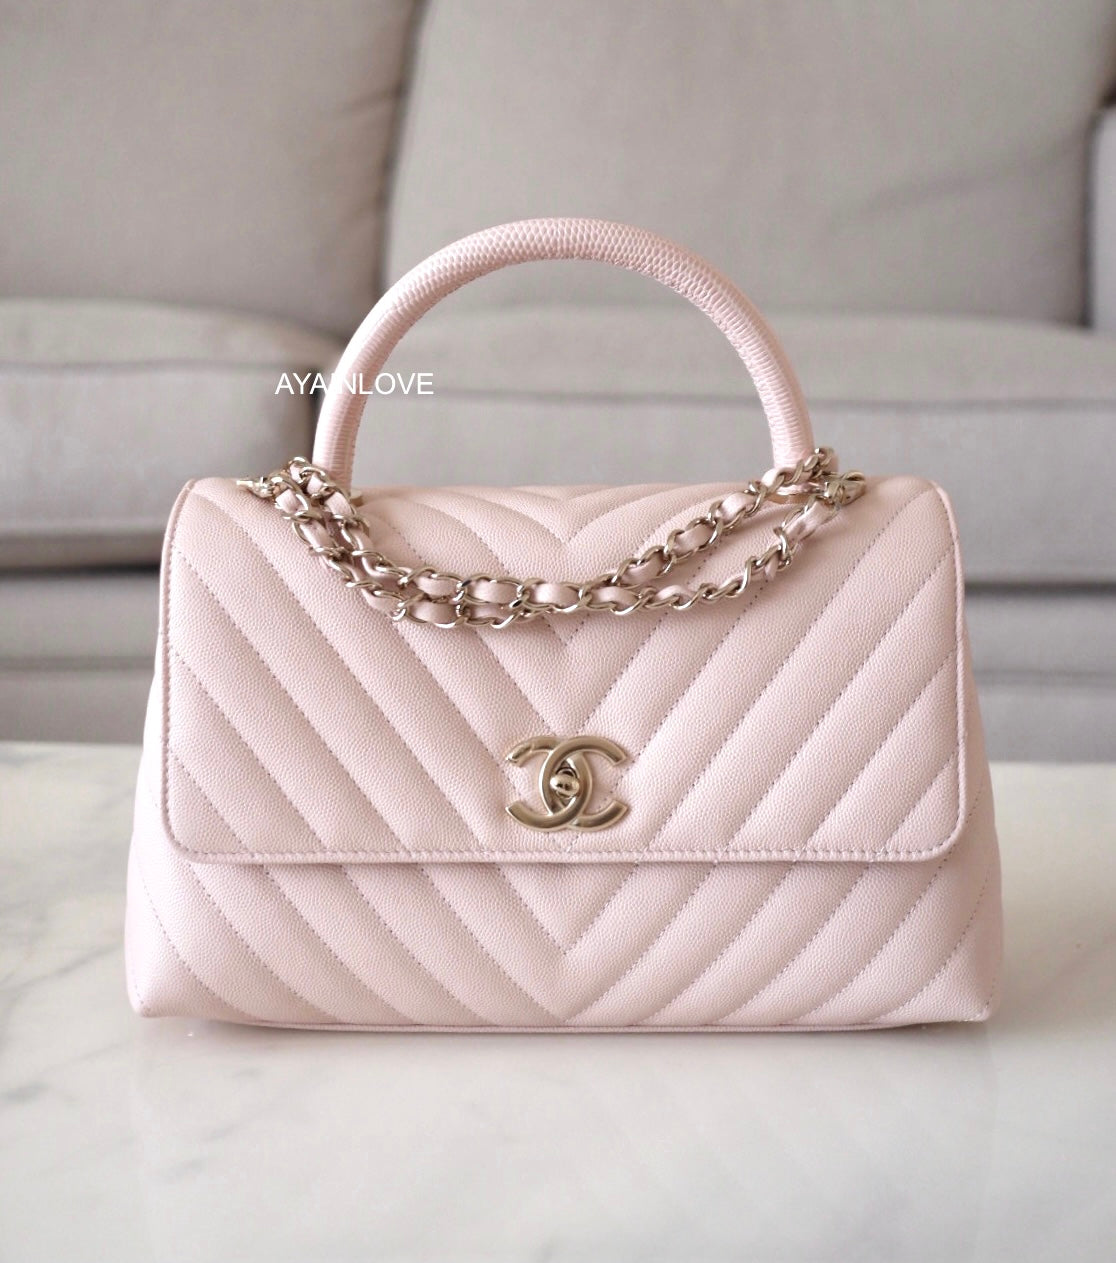 Chanel Coco Handle pink Caviar Small Bag pink gold hw